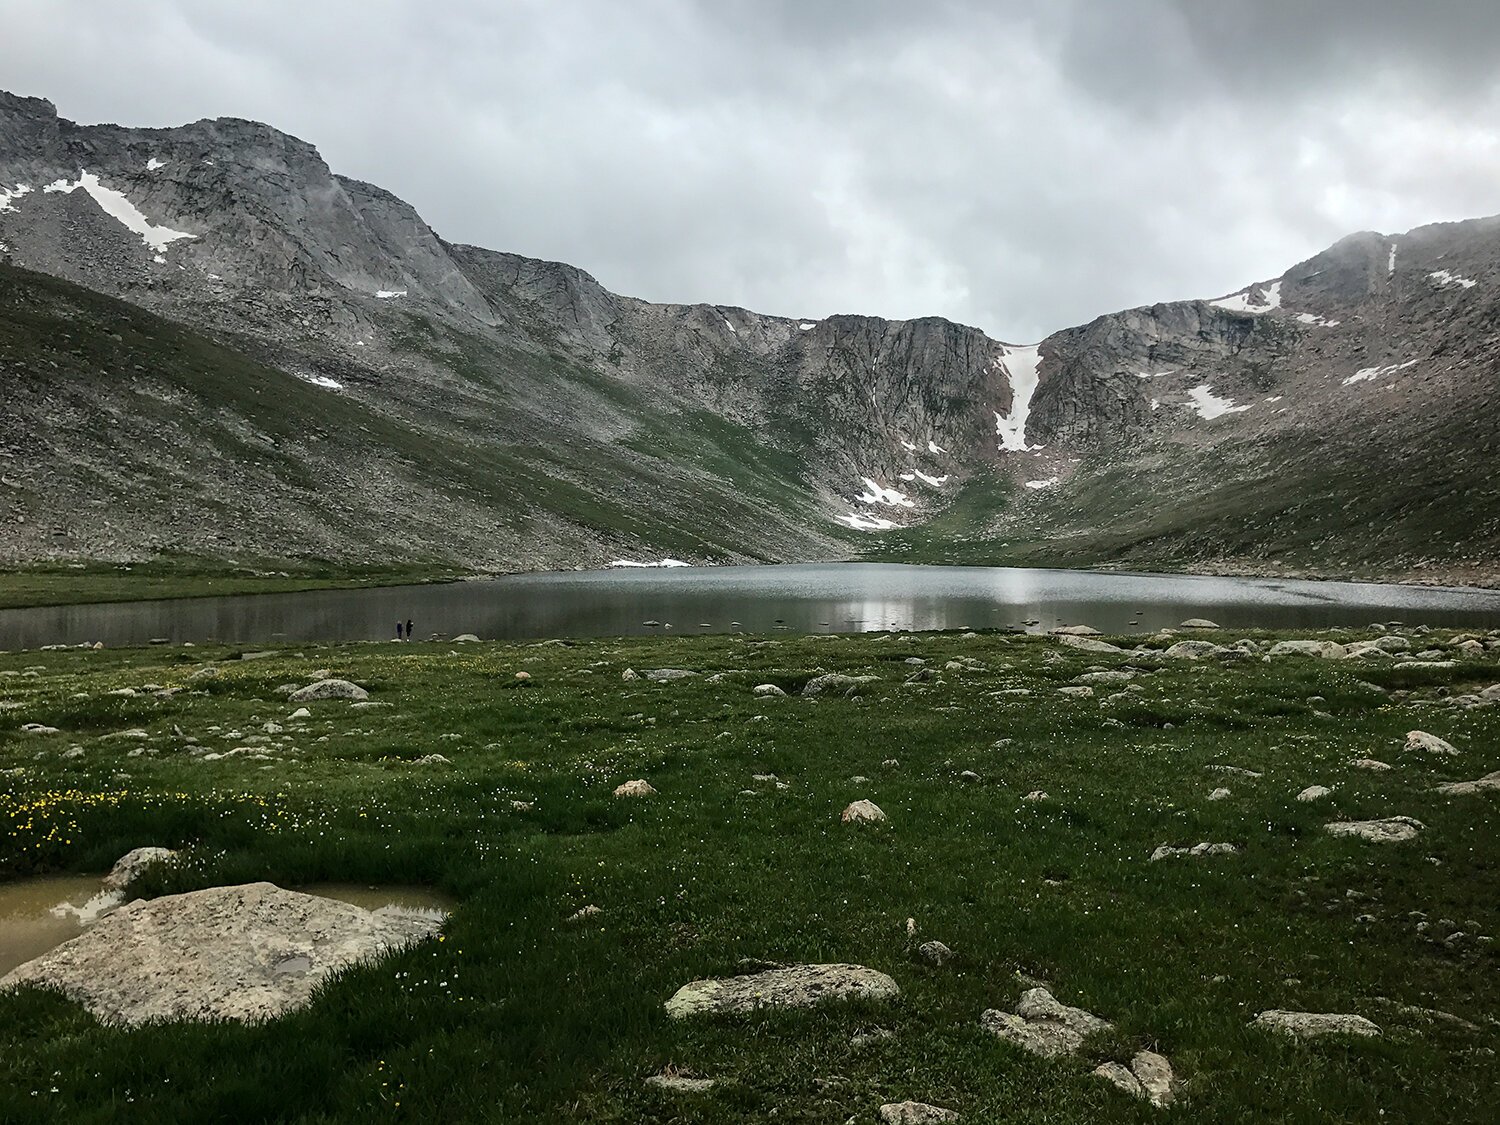 Travels and Curiosities - Mount Evans Scenic Byway